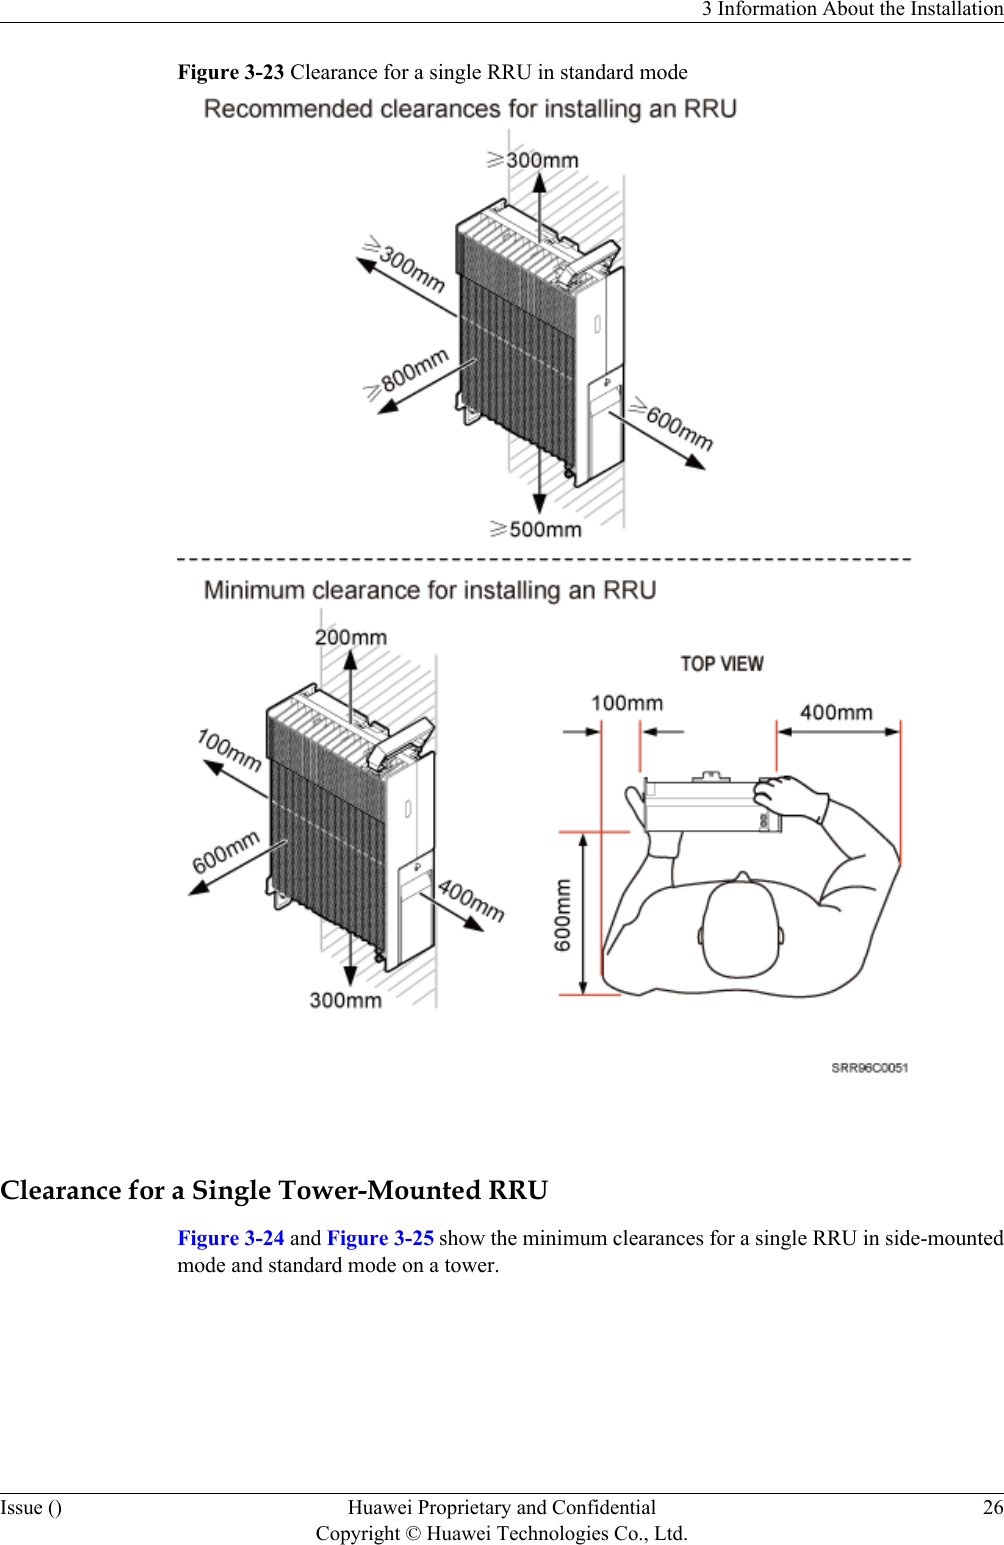 Figure 3-23 Clearance for a single RRU in standard mode Clearance for a Single Tower-Mounted RRUFigure 3-24 and Figure 3-25 show the minimum clearances for a single RRU in side-mountedmode and standard mode on a tower.3 Information About the InstallationIssue () Huawei Proprietary and ConfidentialCopyright © Huawei Technologies Co., Ltd.26